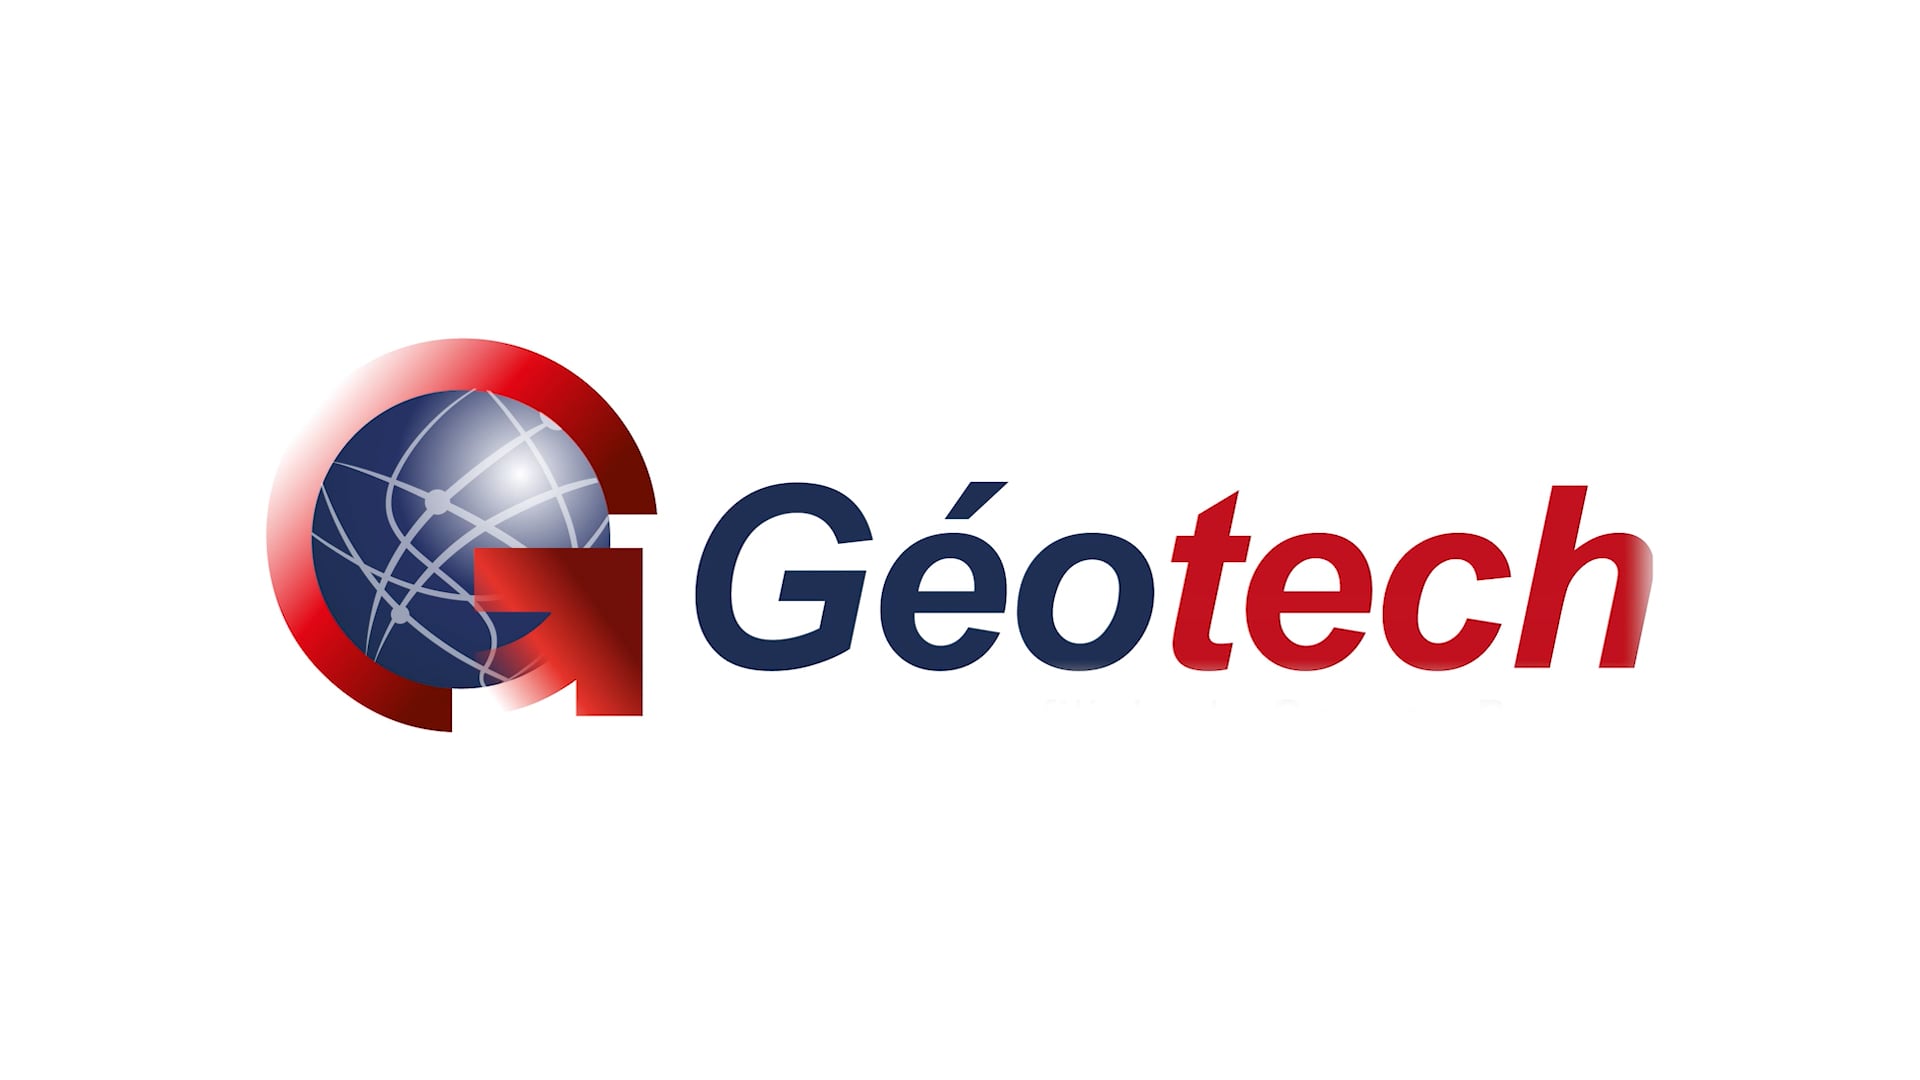 Geotech - Visit Anywhere